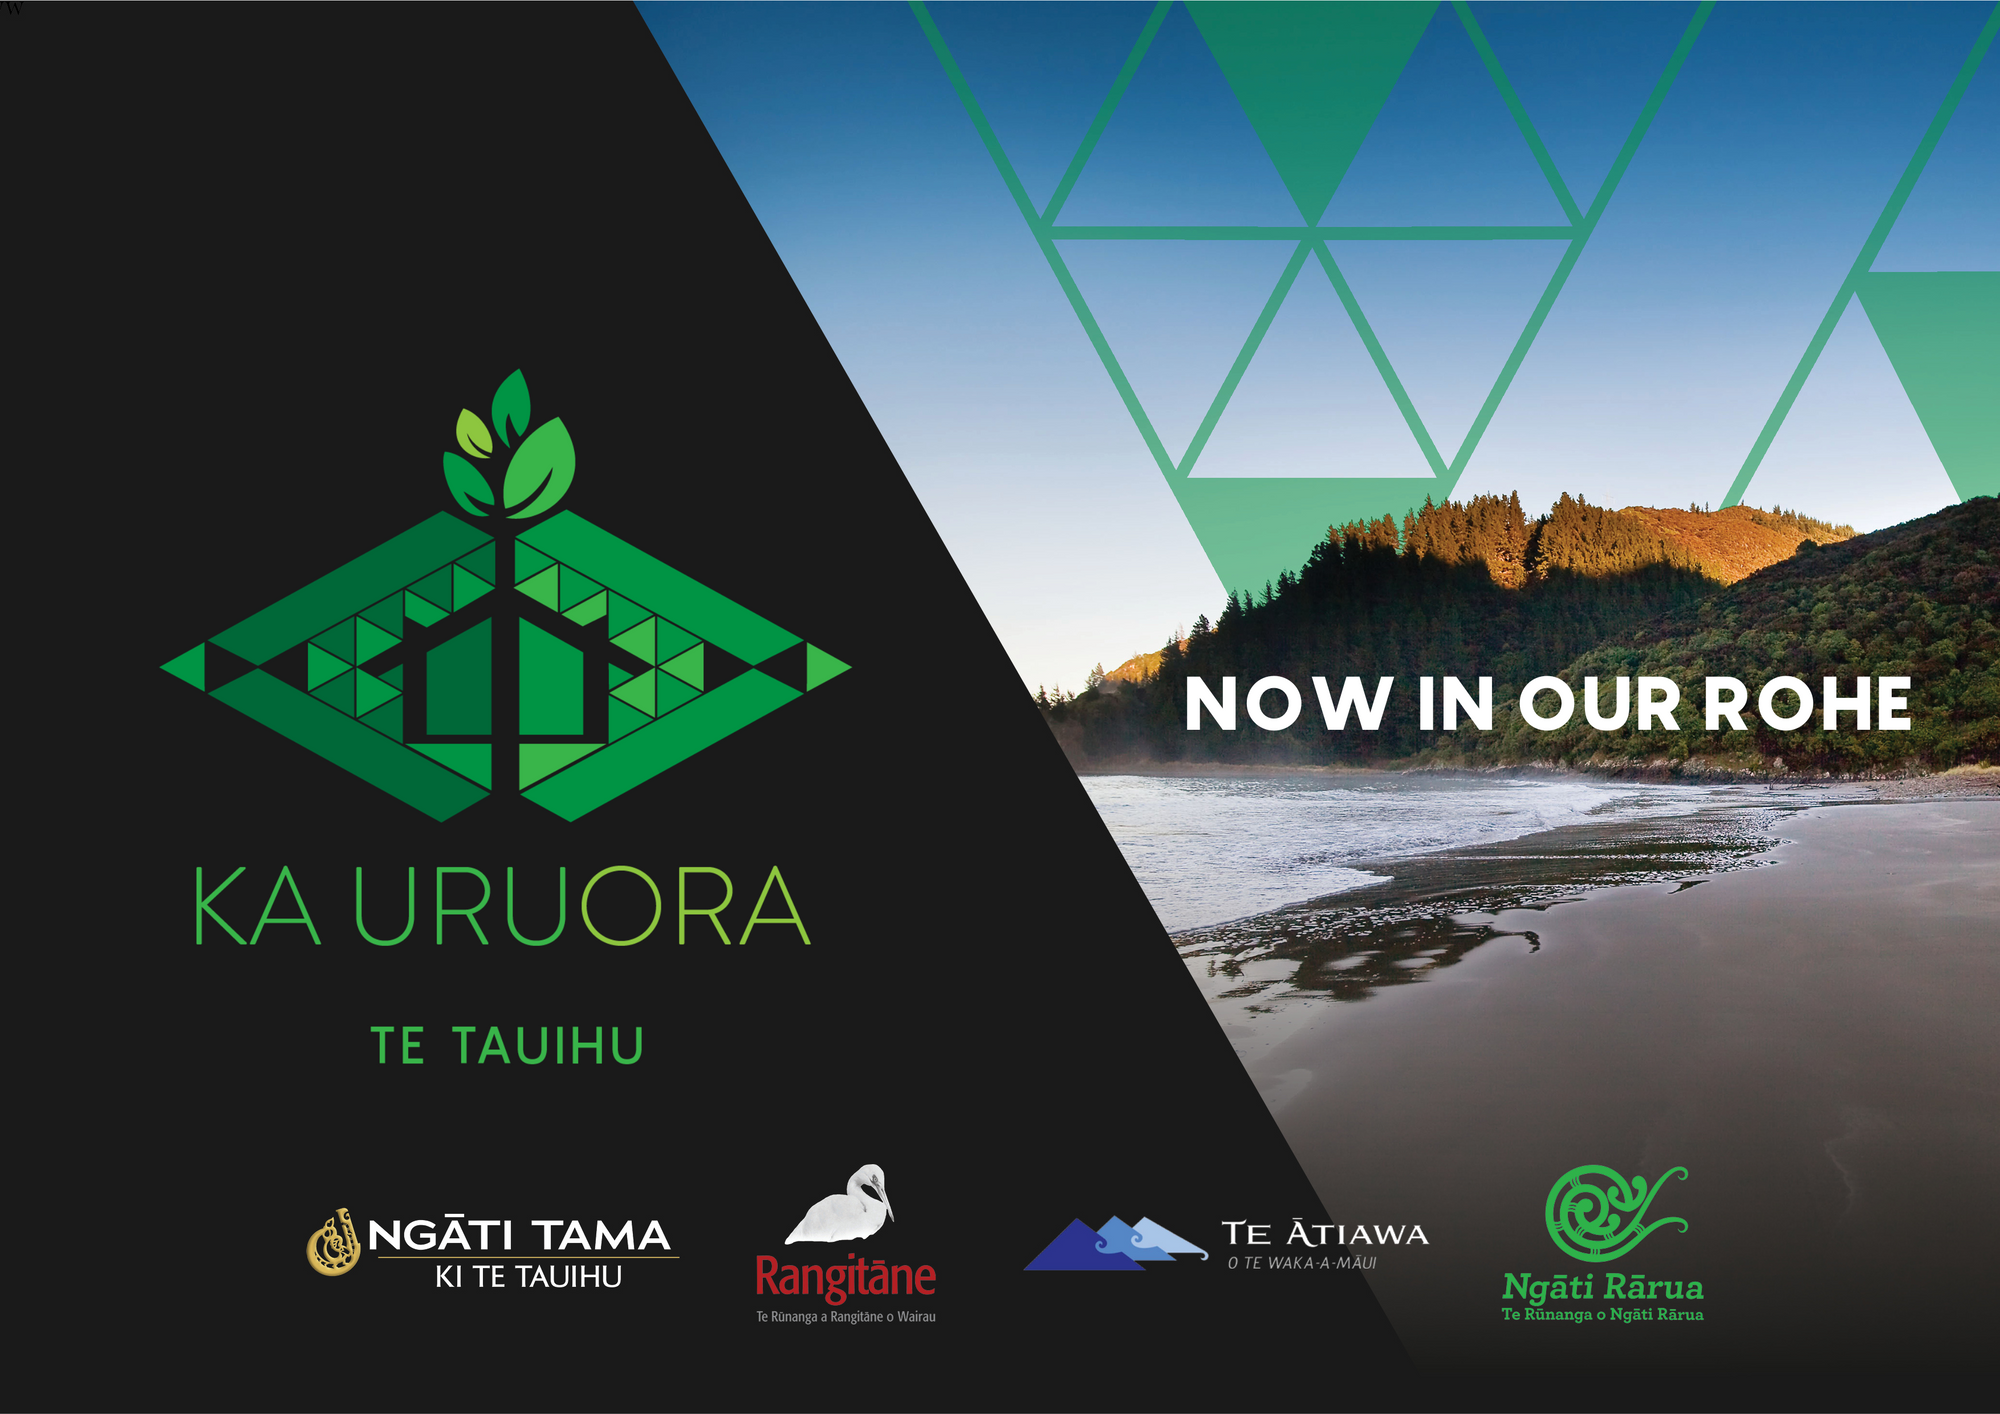 Ka Uruora Te Tauihu supports financial independence and improved wellbeing